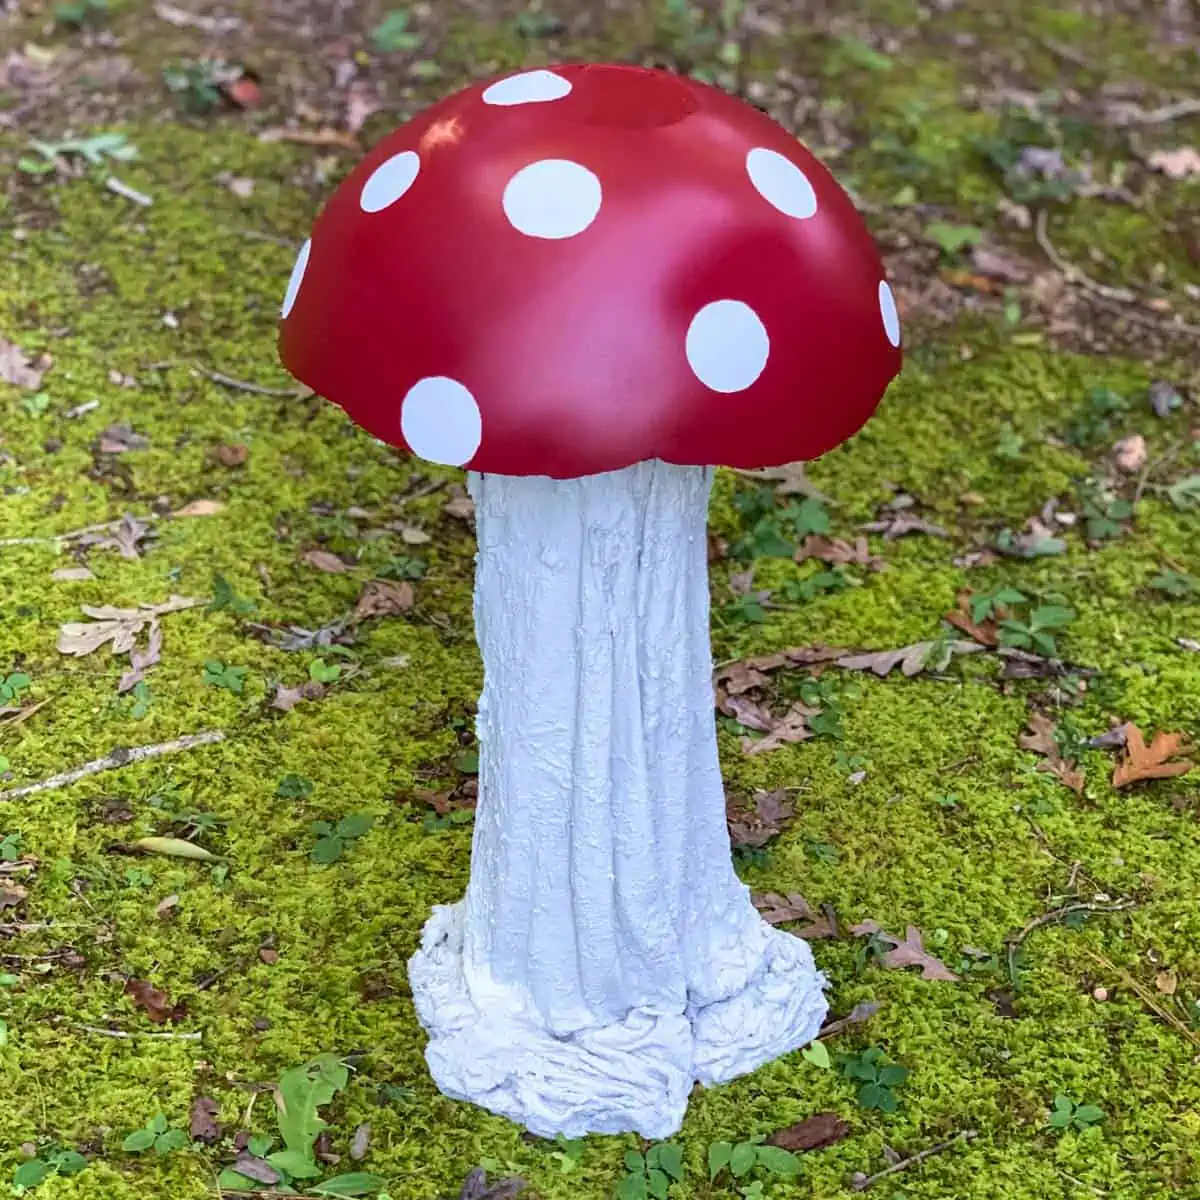 a mushroom made from concrete on a mossy lawn. the cap is red with white spots.